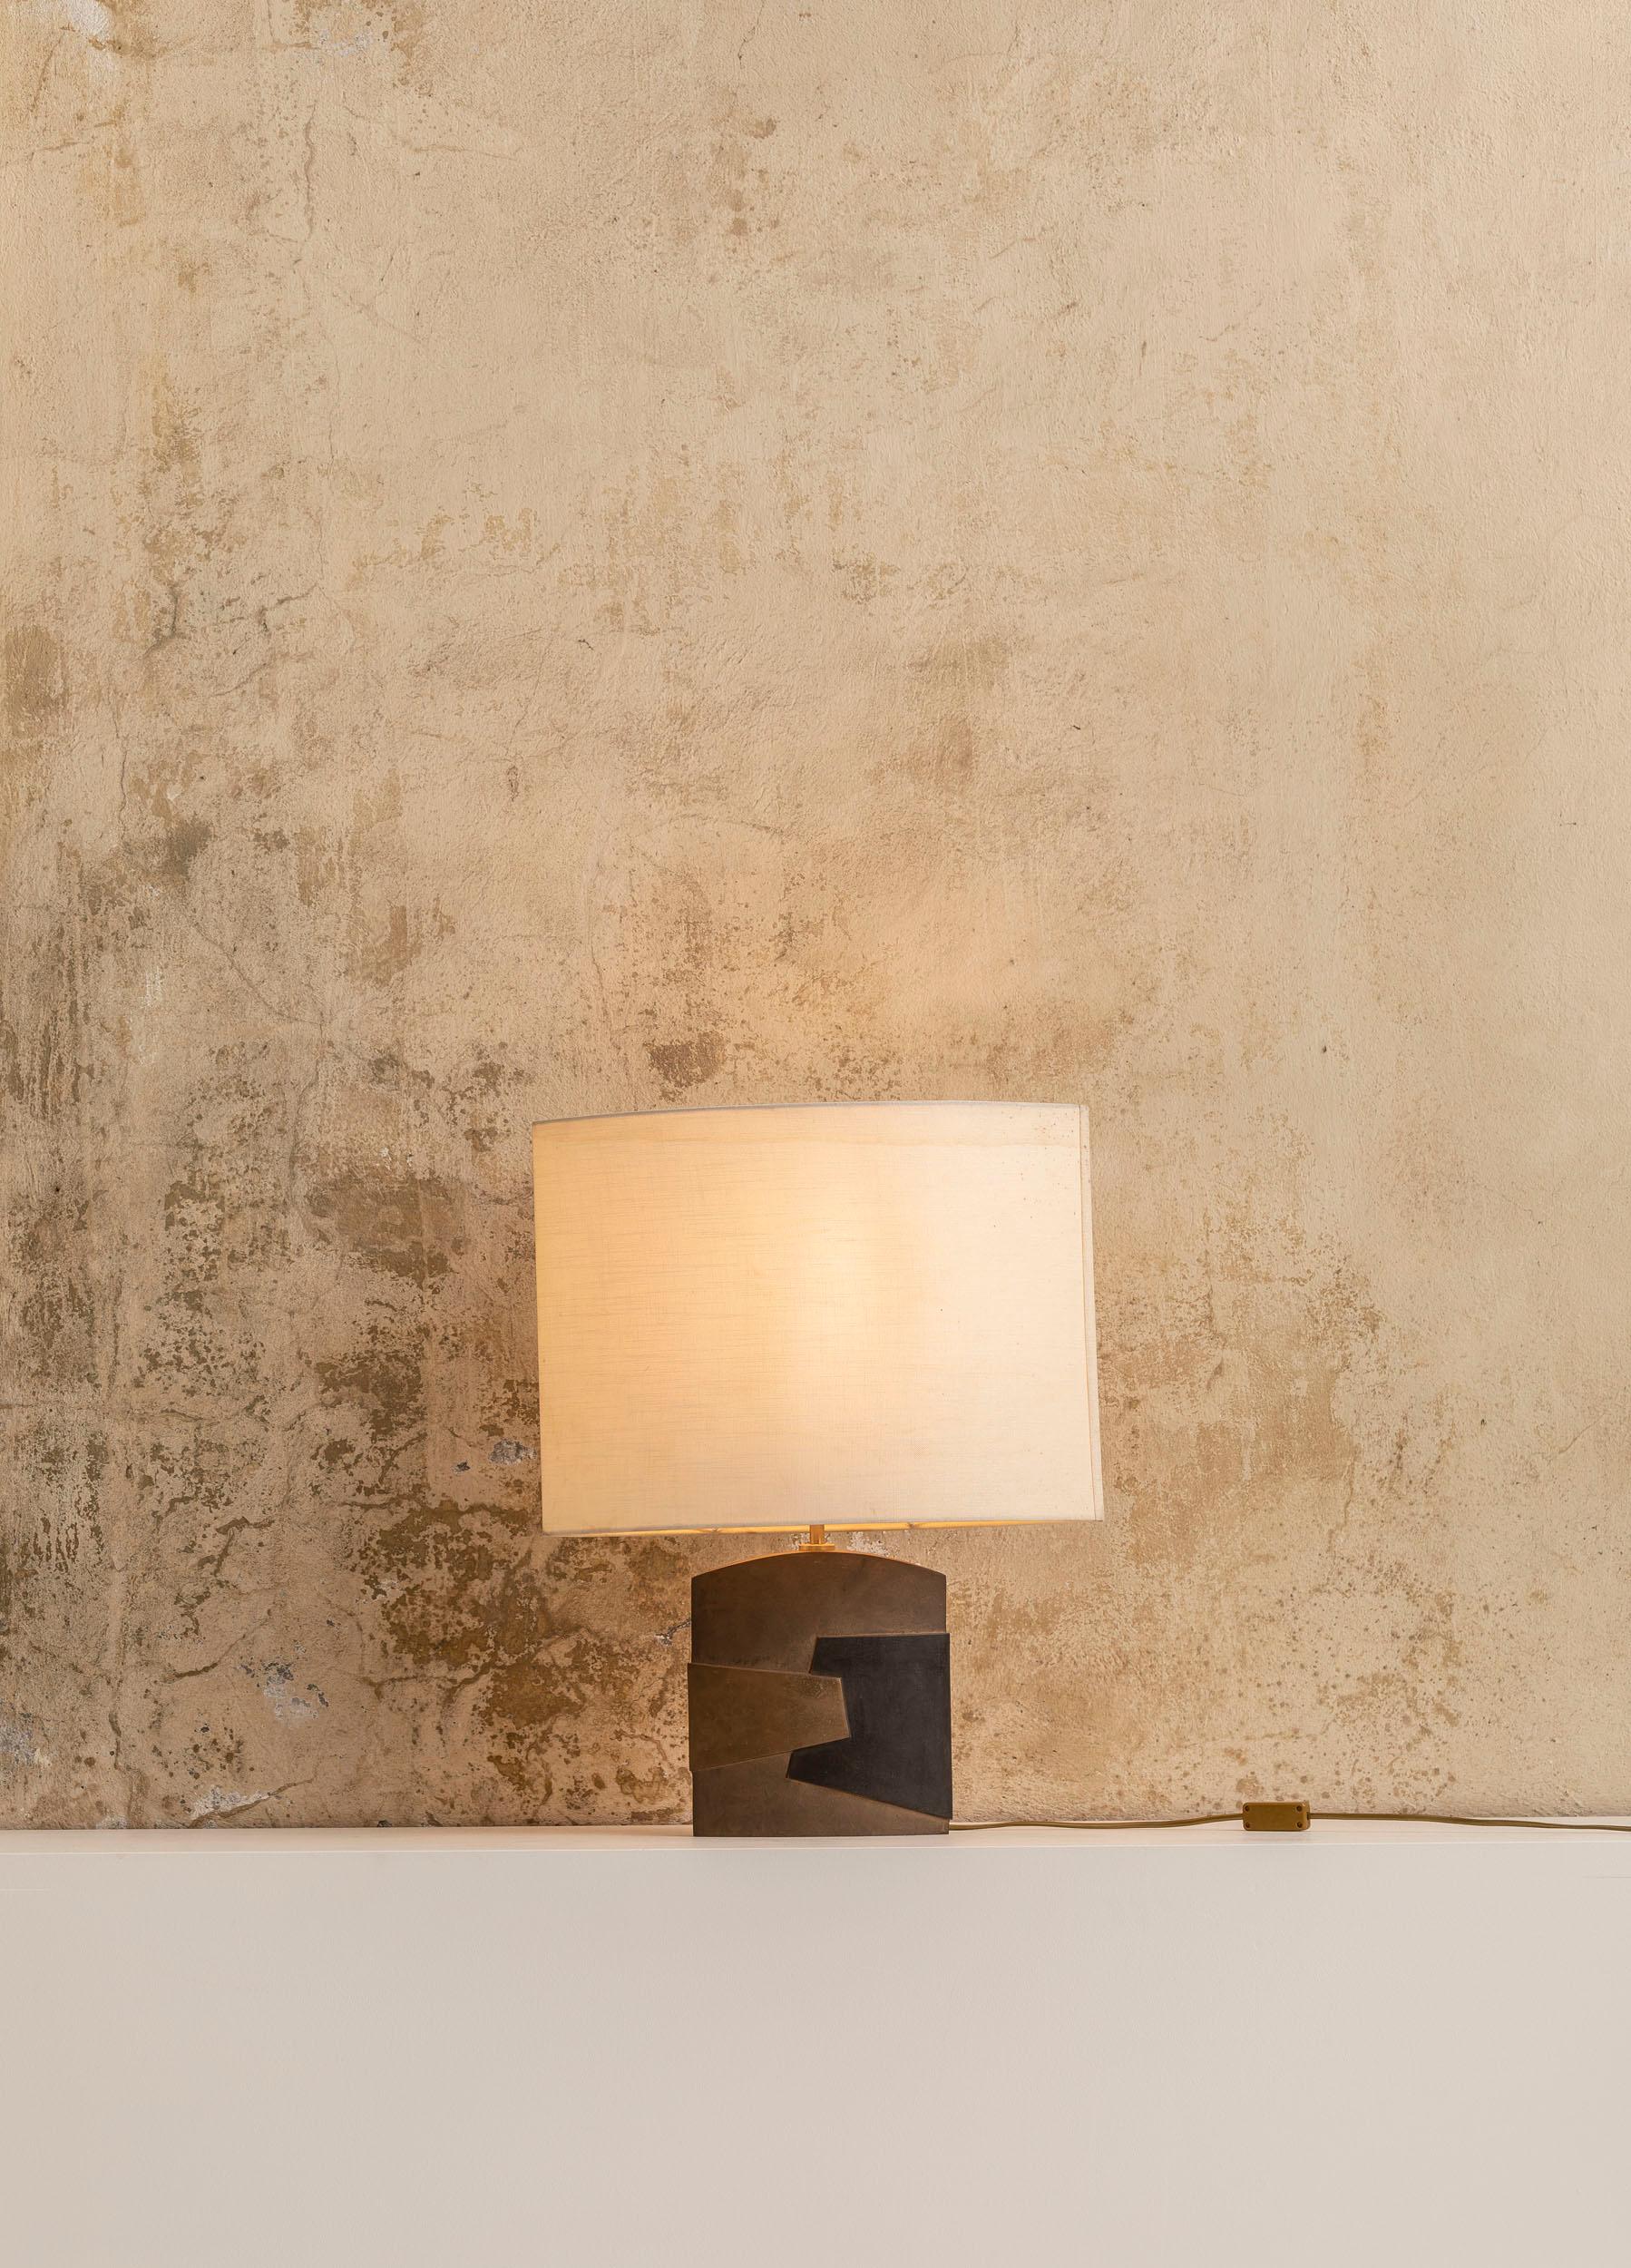 Table lamp by Esa Fedrigolli with a bronze base and an original shade.
The base presents a composition of geometrical elements in solid brass in three different colors. The original white shade has the same shape of the base, convex in the middle